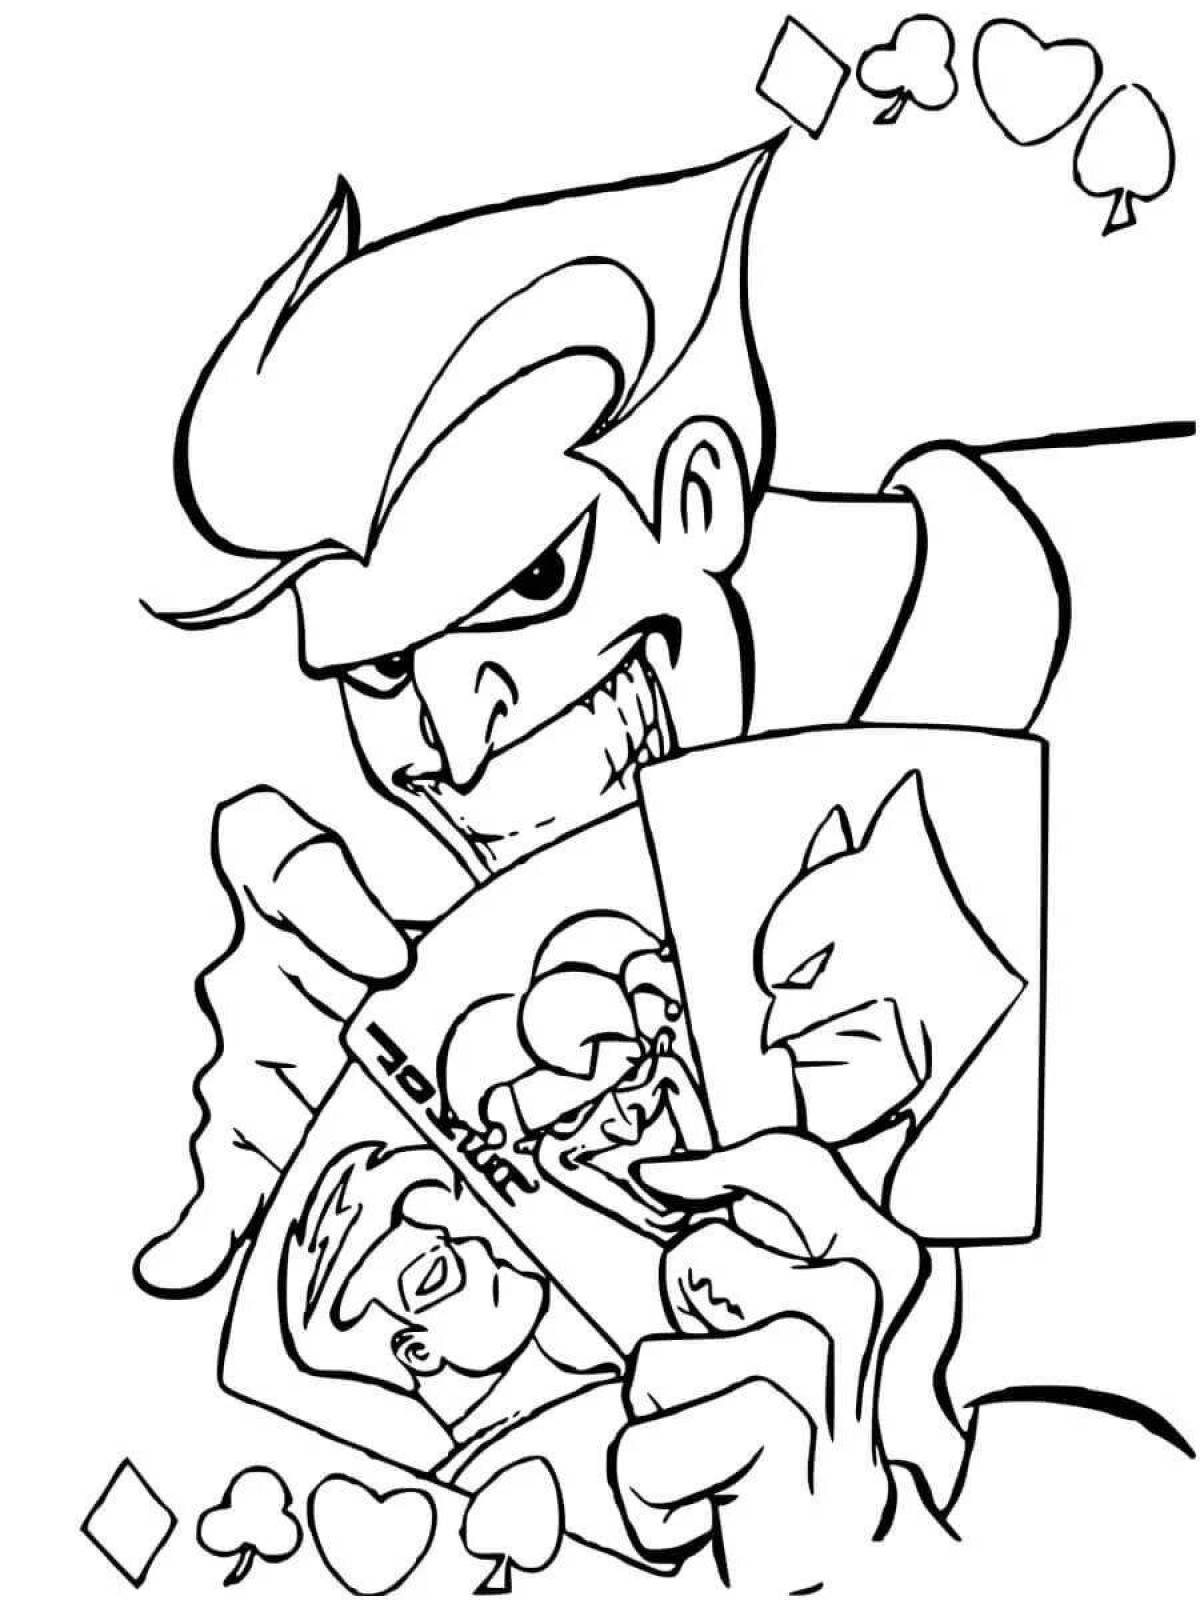 Living joker coloring pages for kids